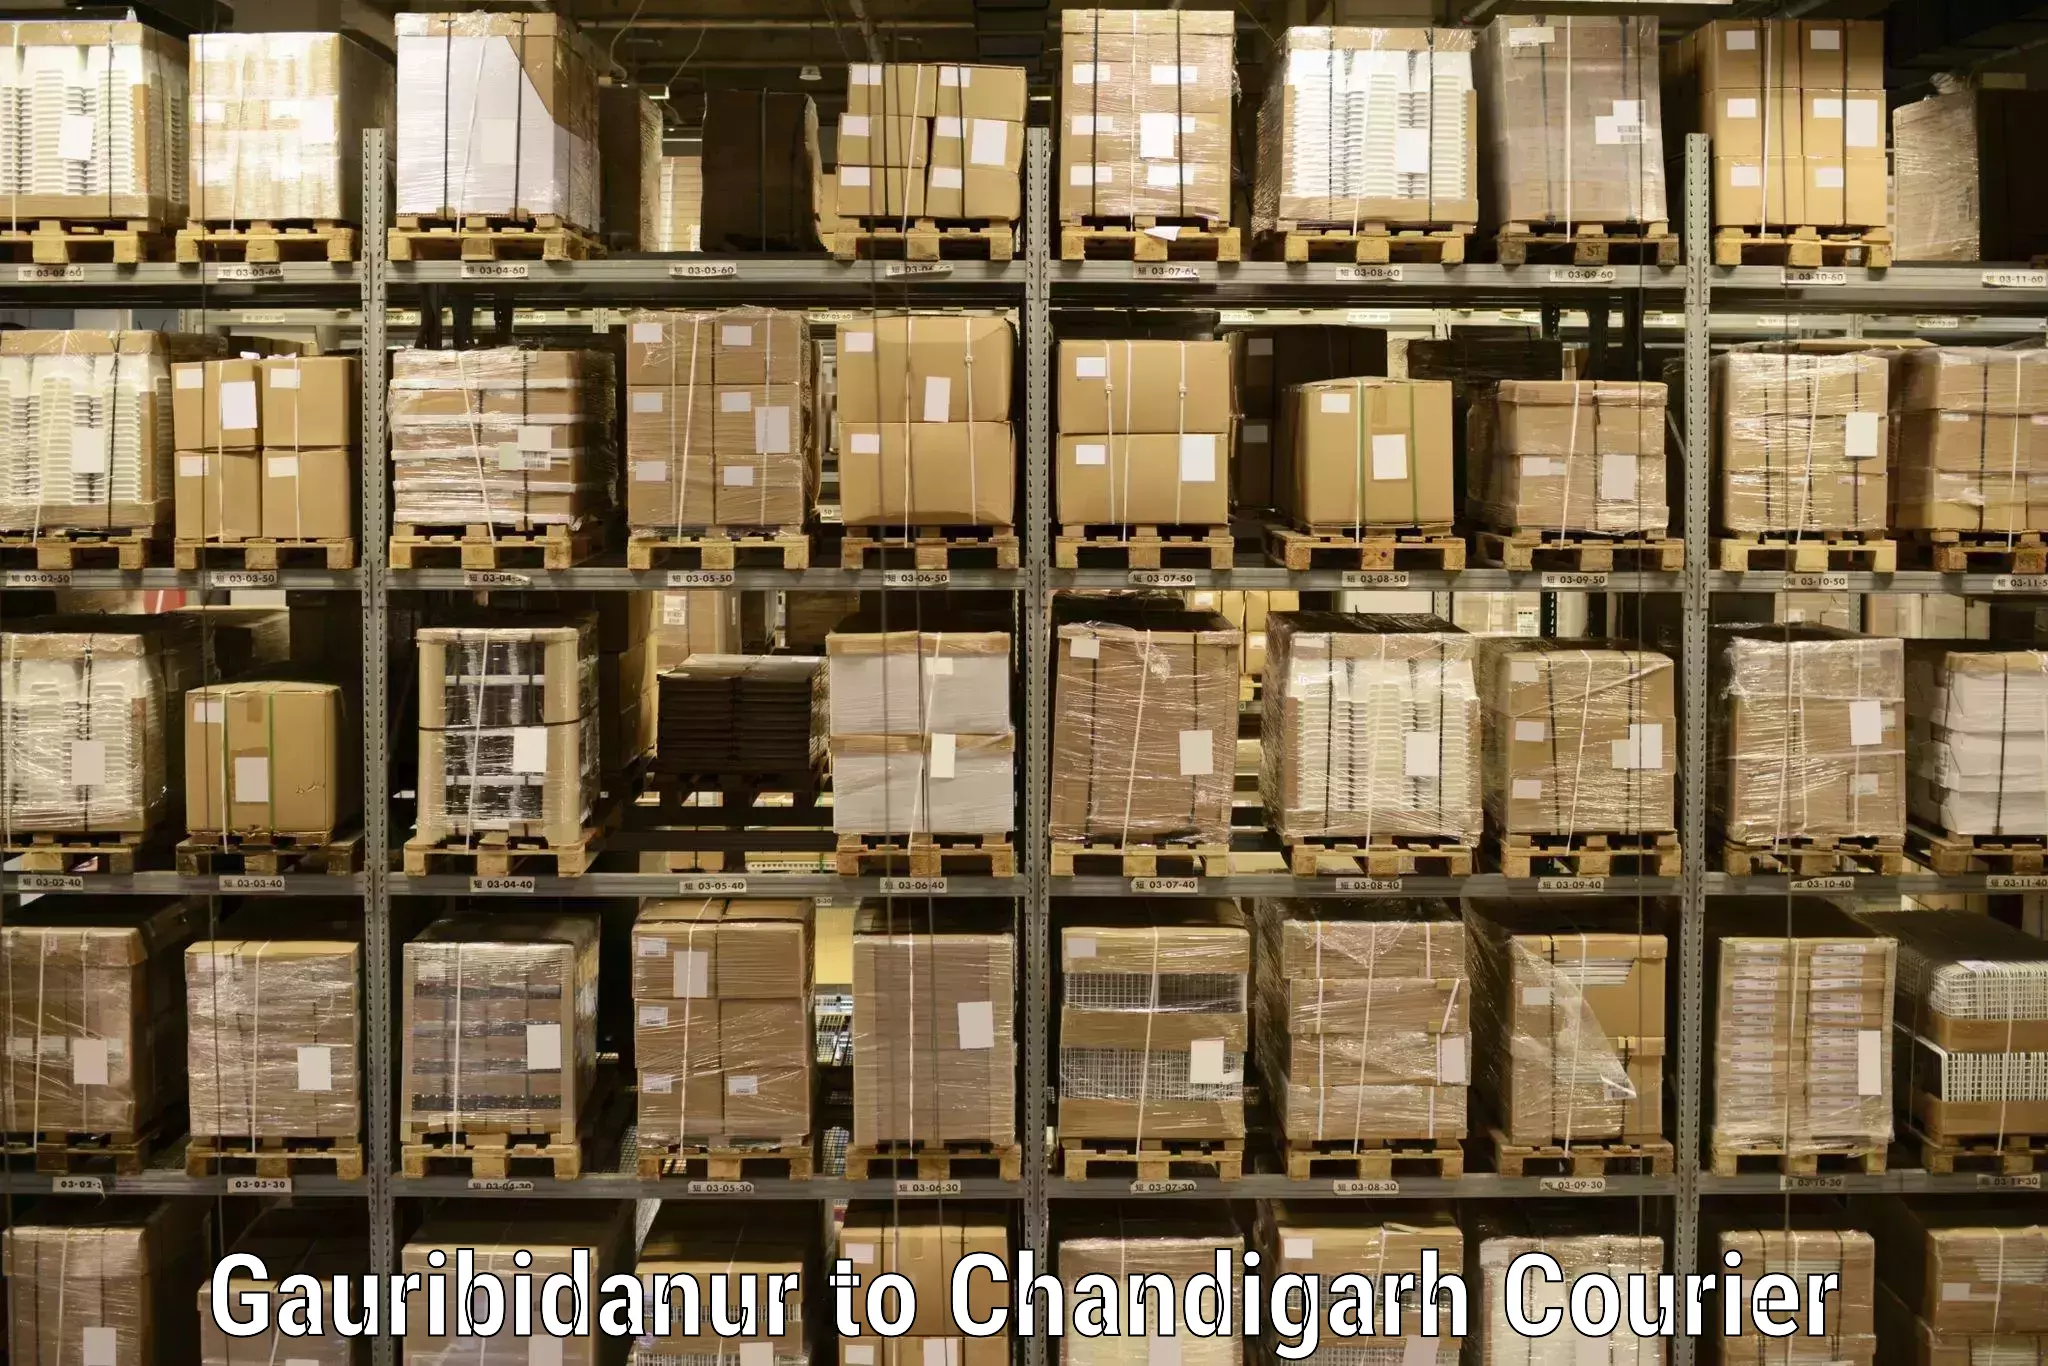 Global shipping networks in Gauribidanur to Chandigarh